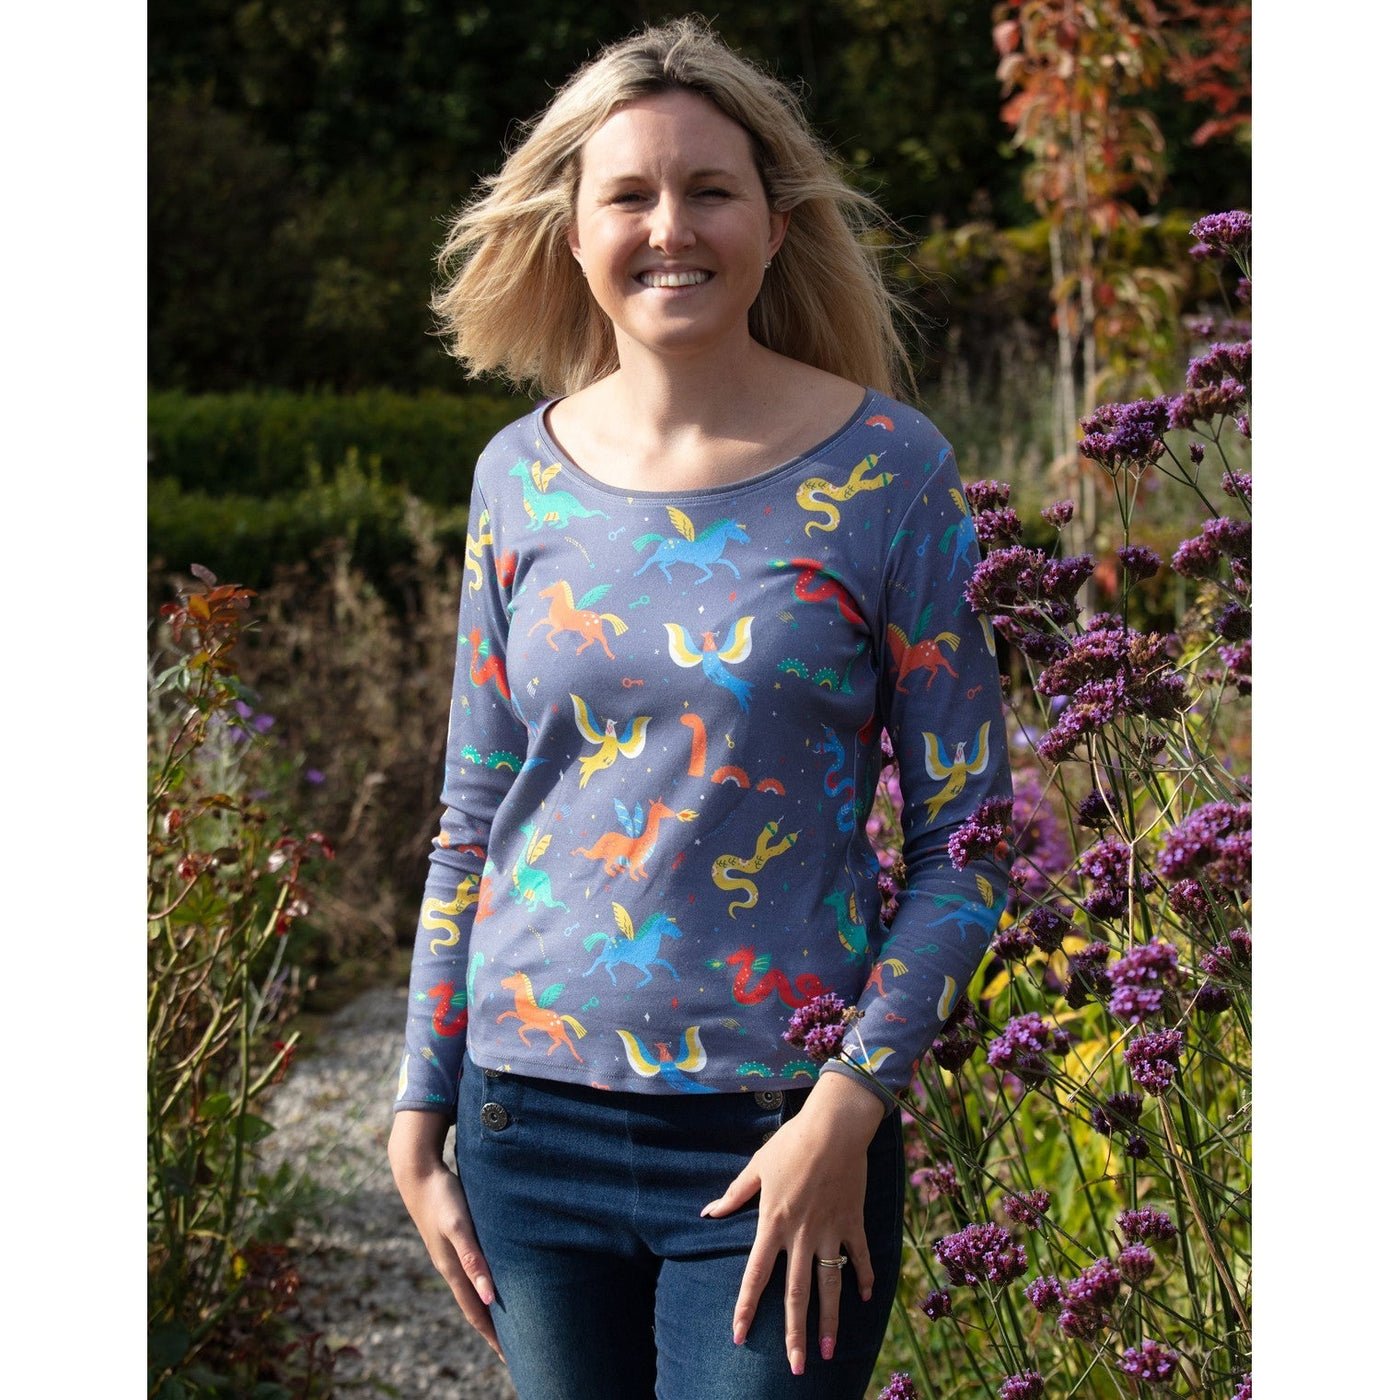 Piccalilly Adult Fitted Top - Mythical Creatures